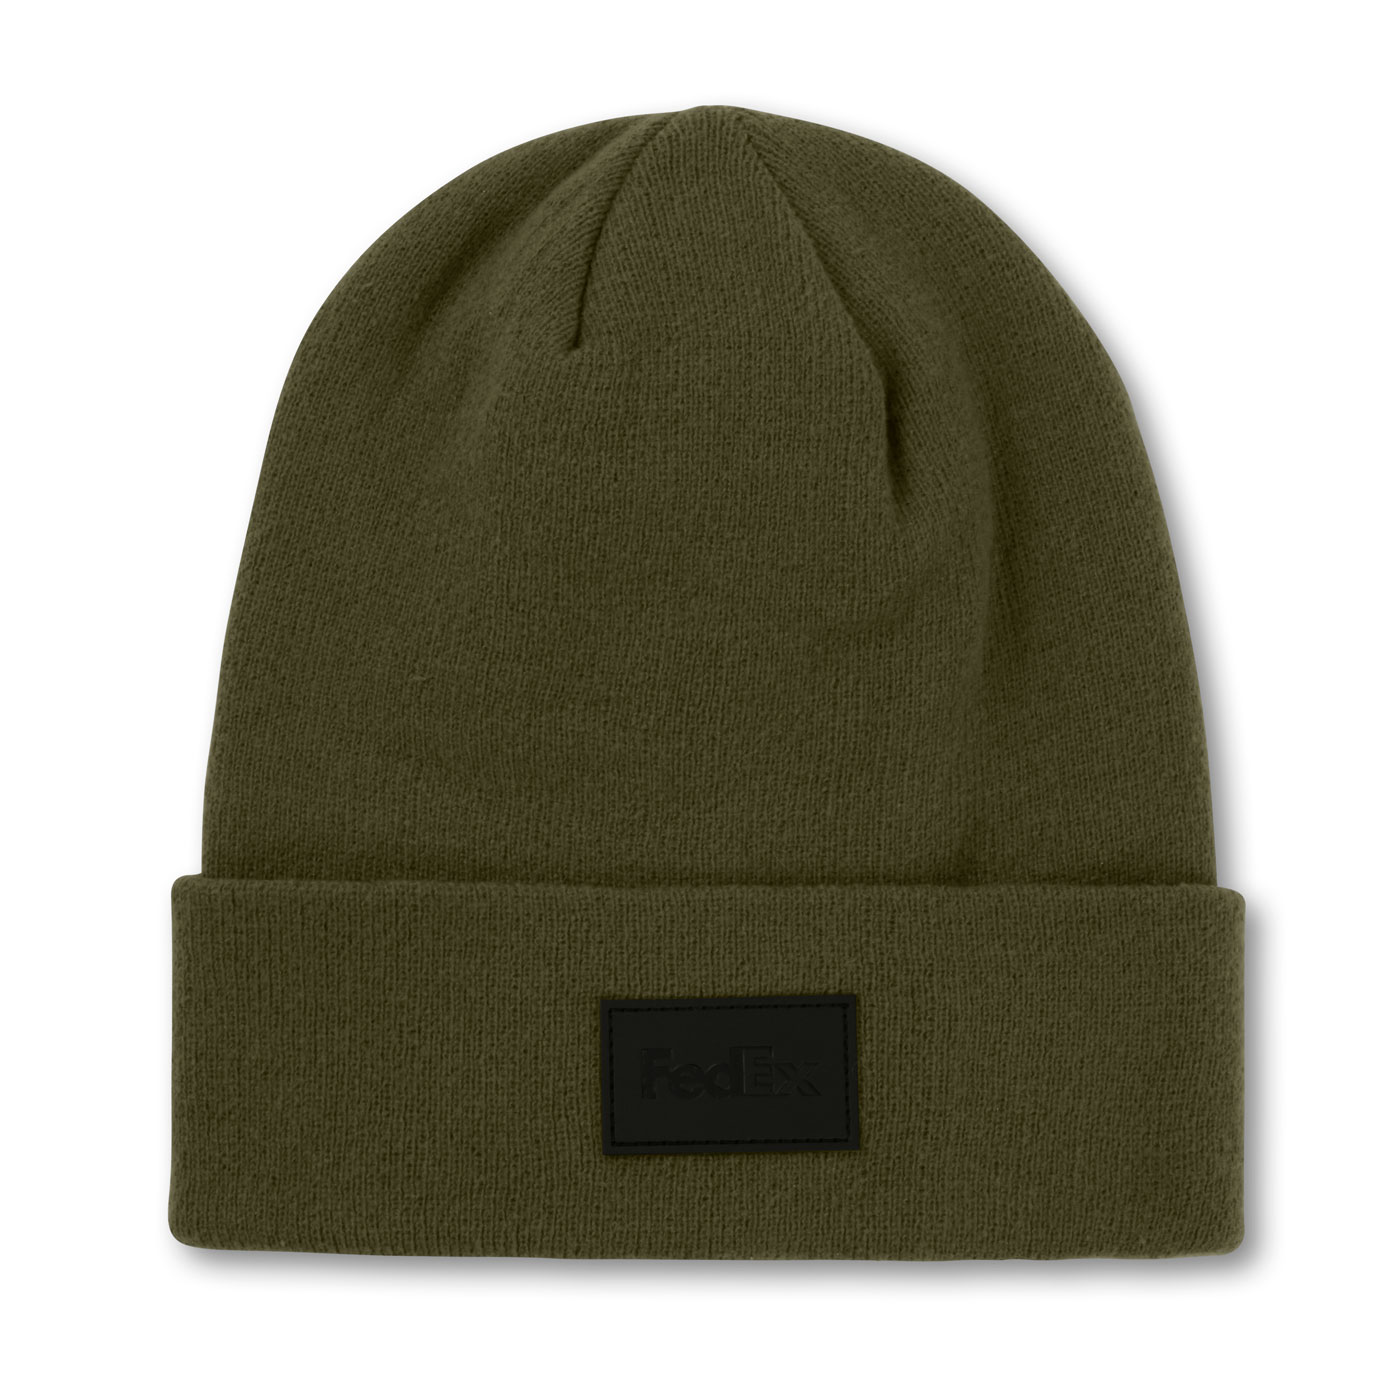 FedEx Recycled “Butter” Beanie | The FedEx Company Store